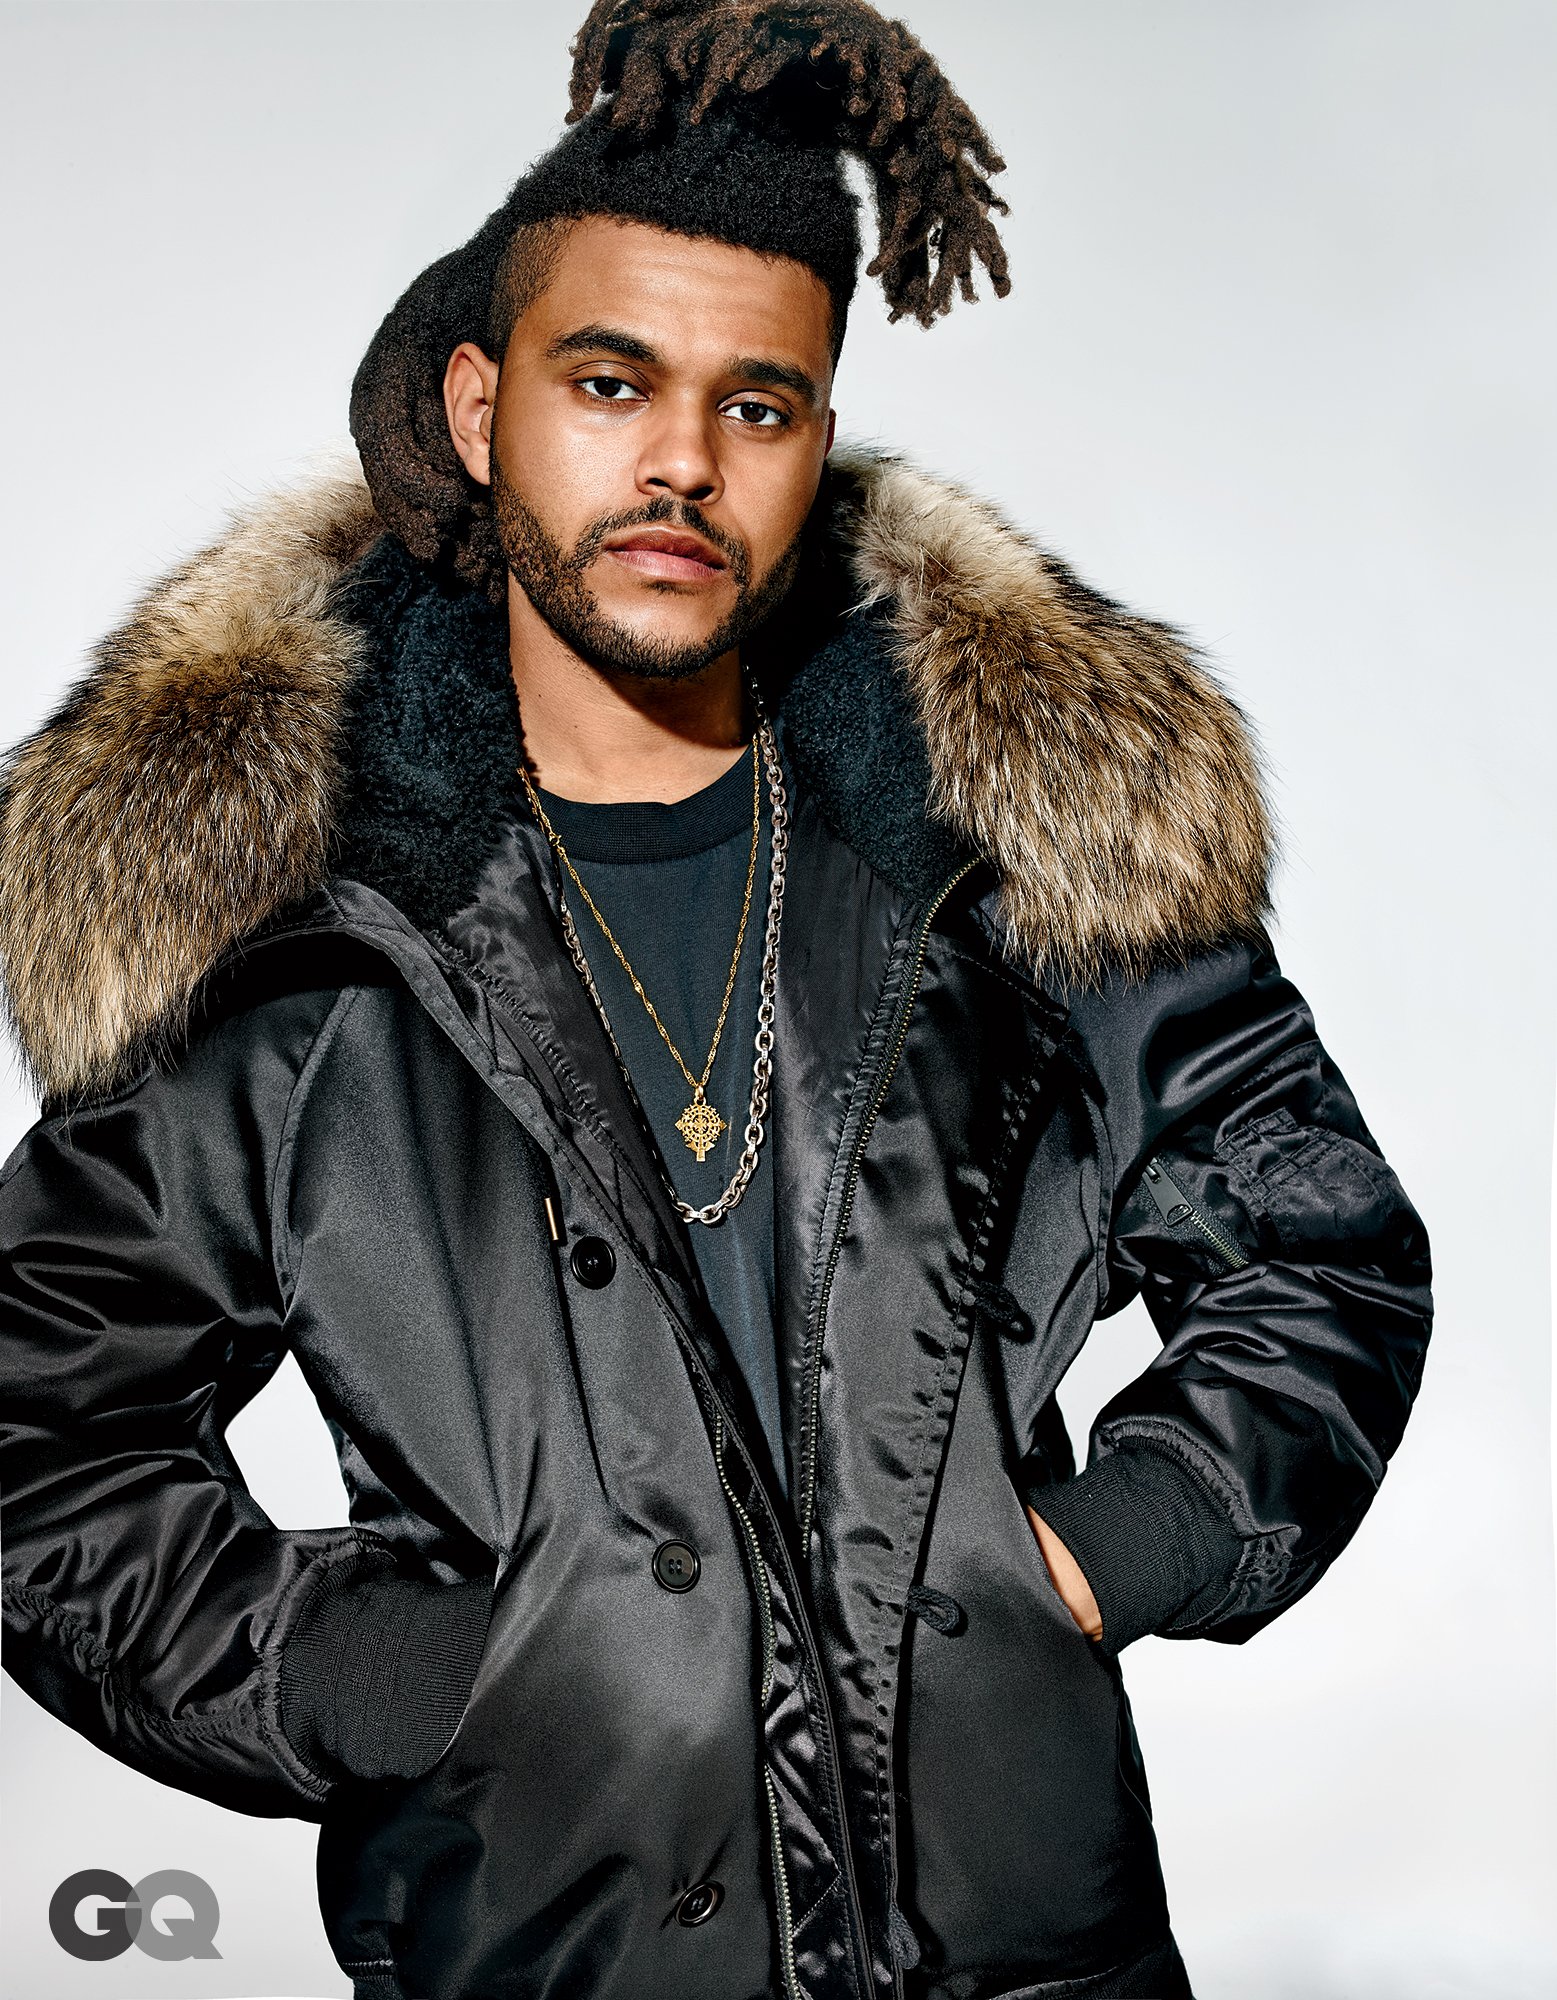 The Weeknd Teases Kanye West’s Yeezy Season 1 Collection in GQ